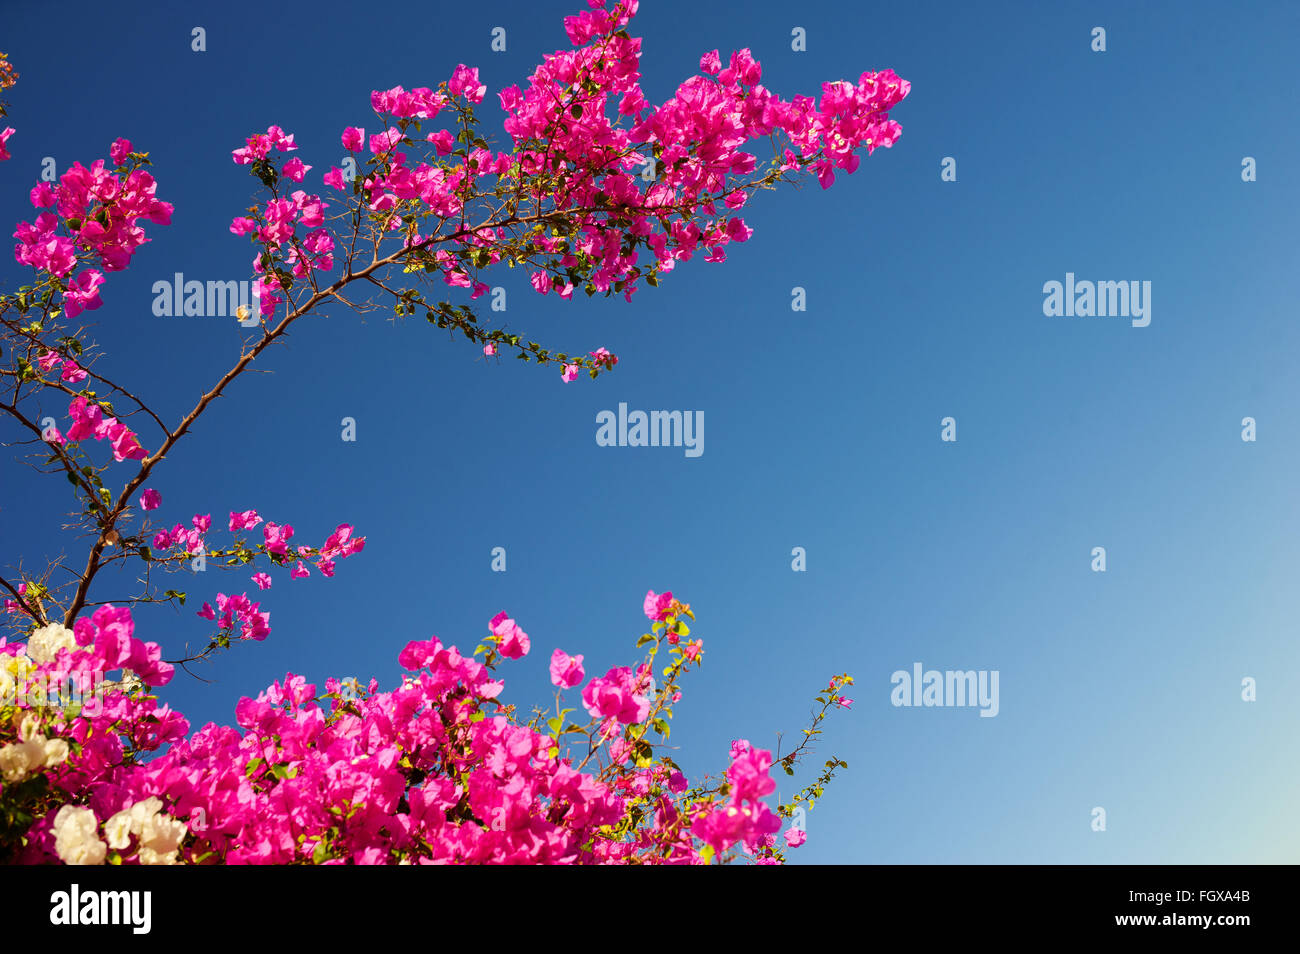 pink bougainvillea flowering branches on a background of blue sky Stock Photo